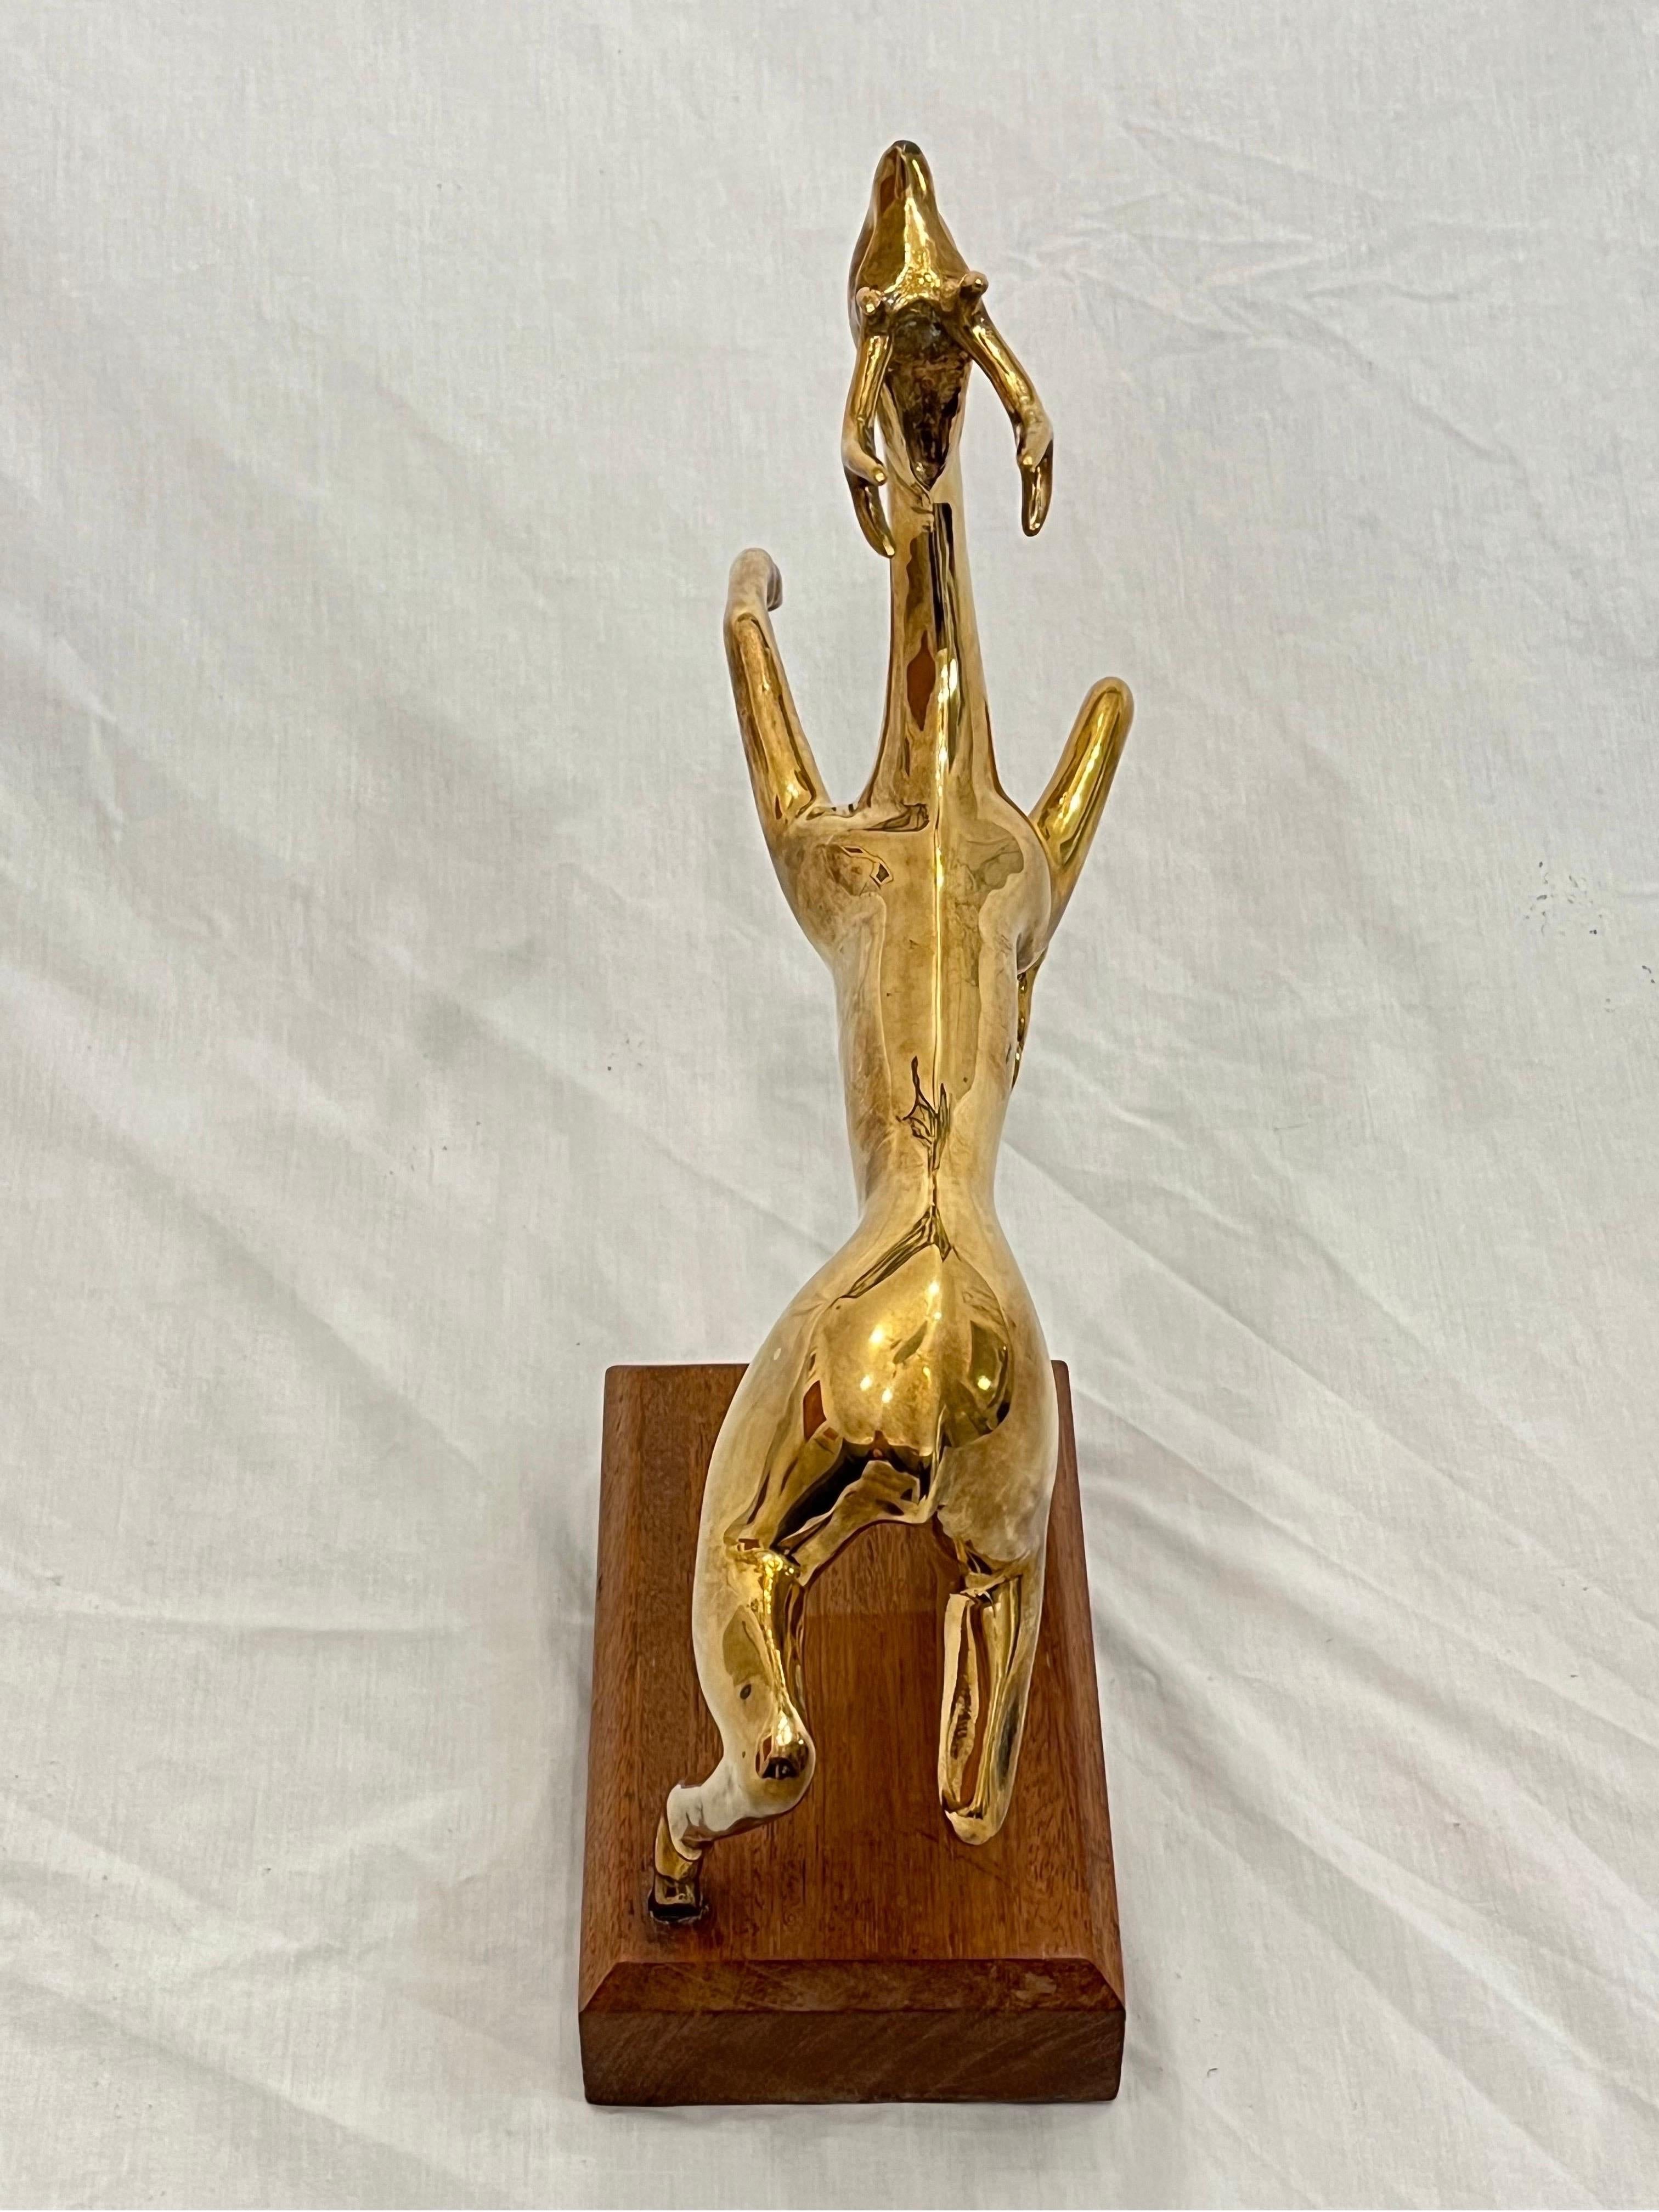 Vintage Thai Somchai Hattakitkosol Signed Solid Bronze Sculpture of Leaping Deer For Sale 14